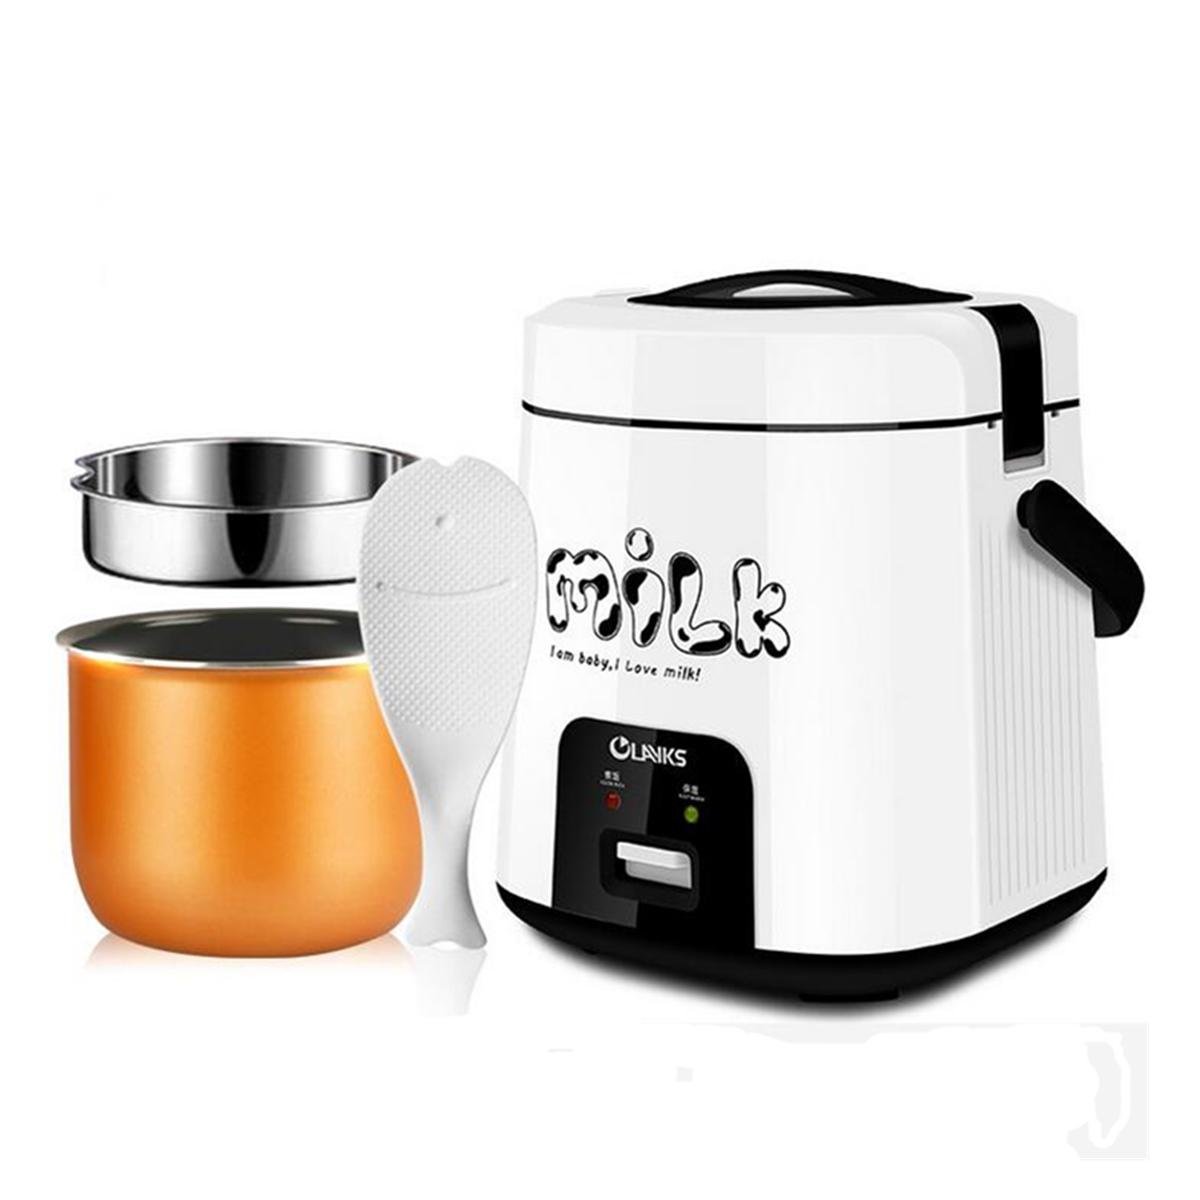 1.8l 300w 23 people portable mini electric rice cooker nonstick cooking pot 220v camping picnic